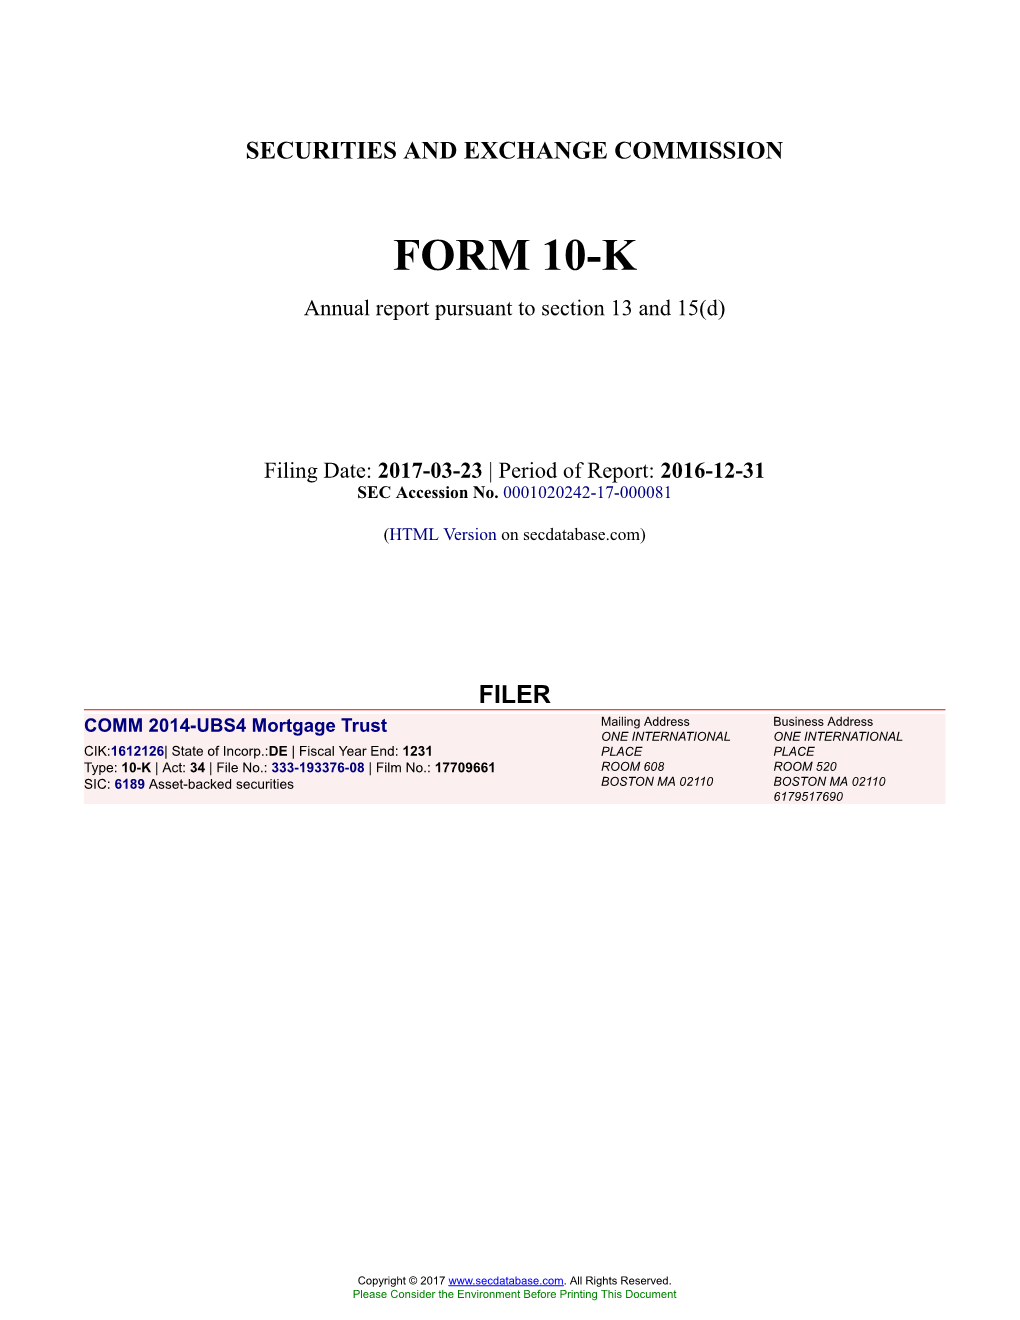 COMM 2014-UBS4 Mortgage Trust Form 10-K Annual Report Filed